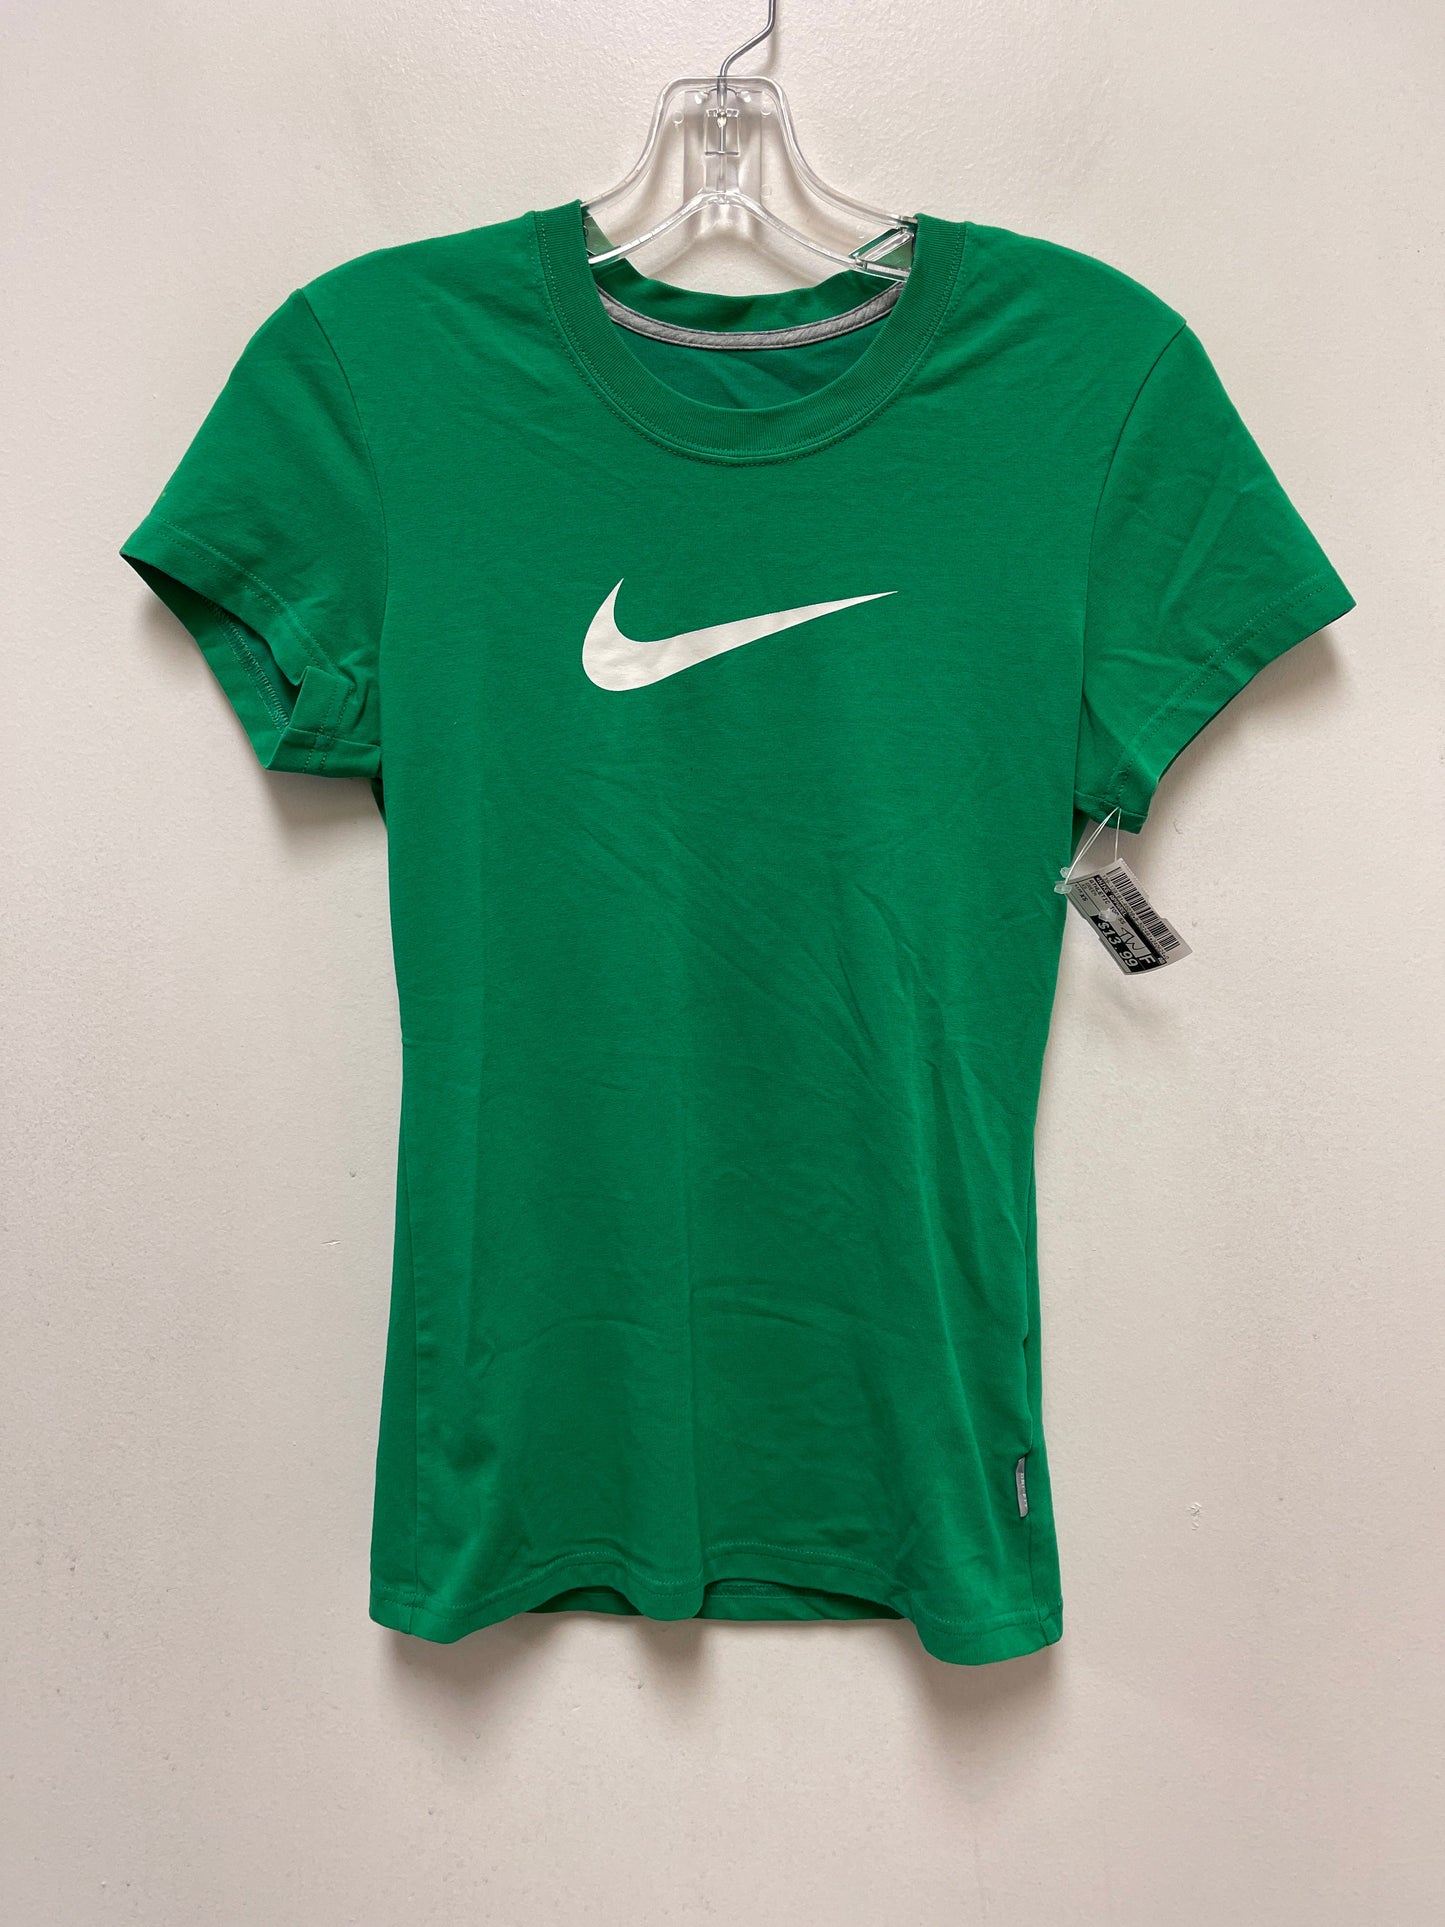 Green Athletic Top Short Sleeve Nike Apparel, Size Xs